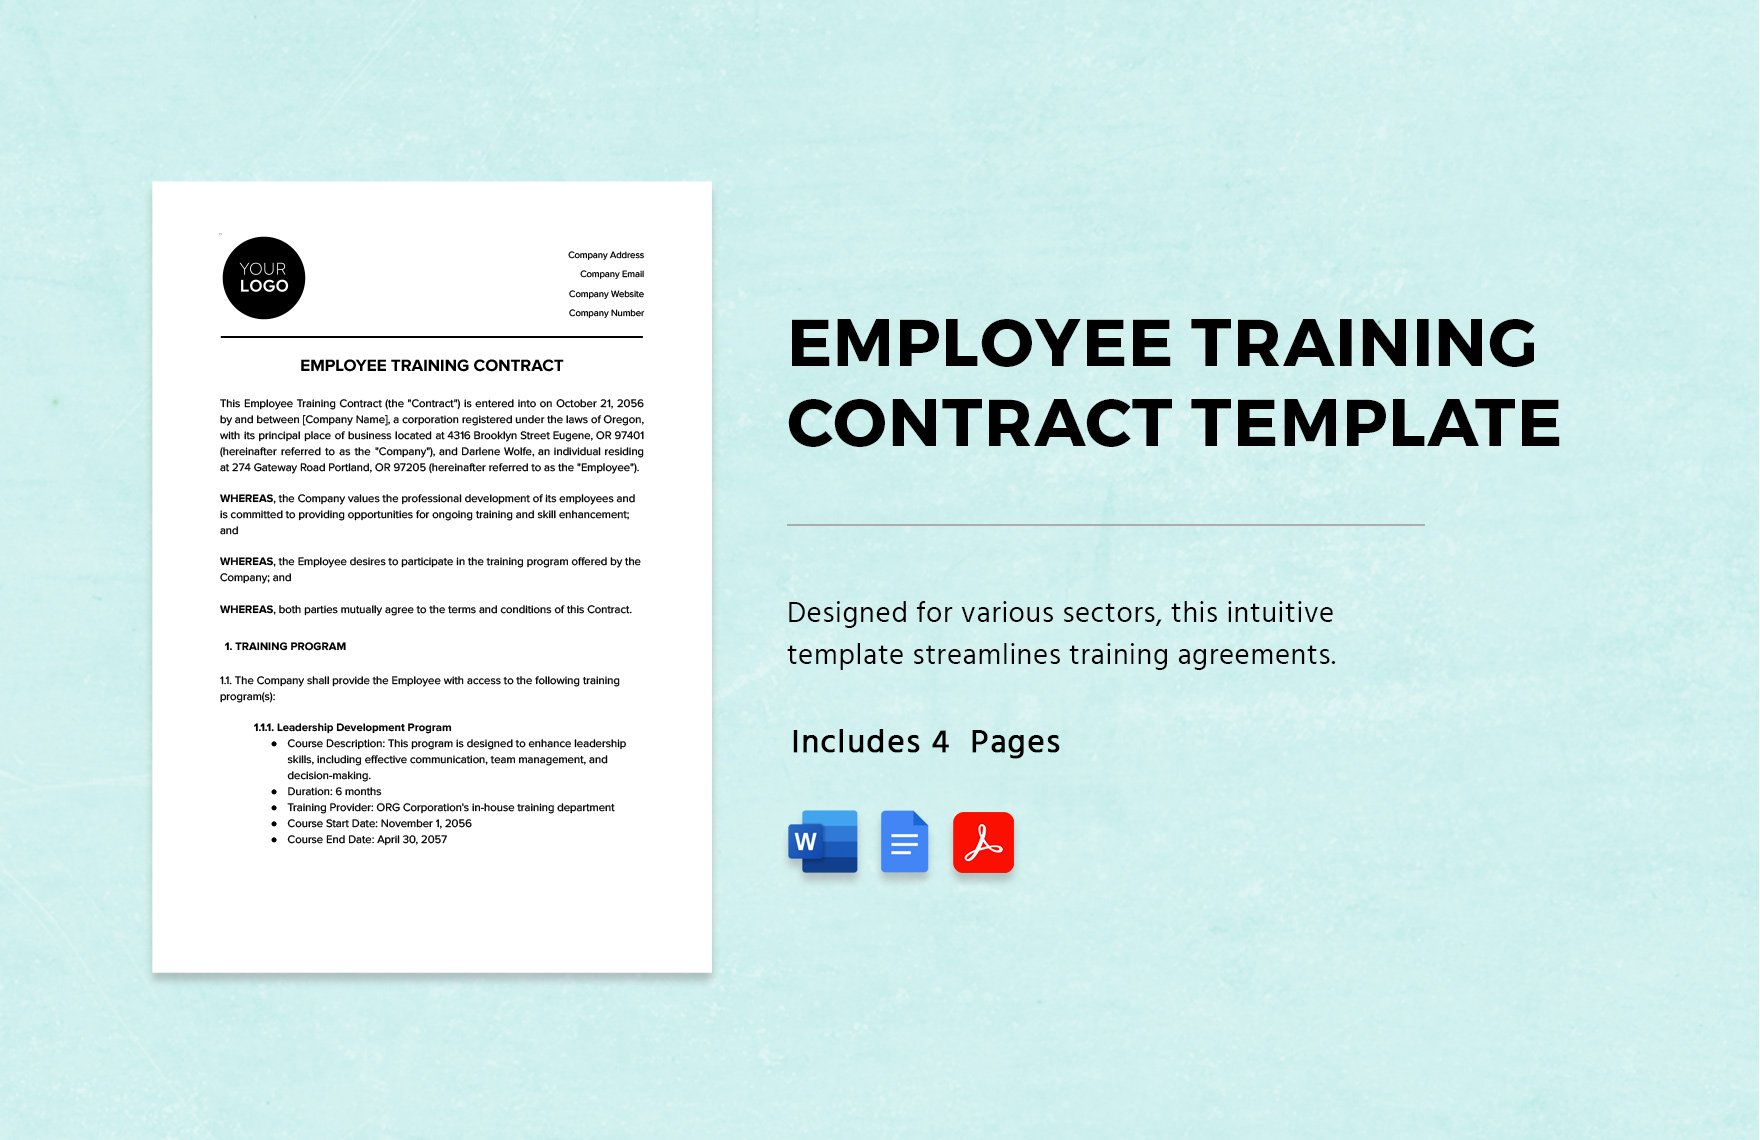 training agreement between employer and employee template